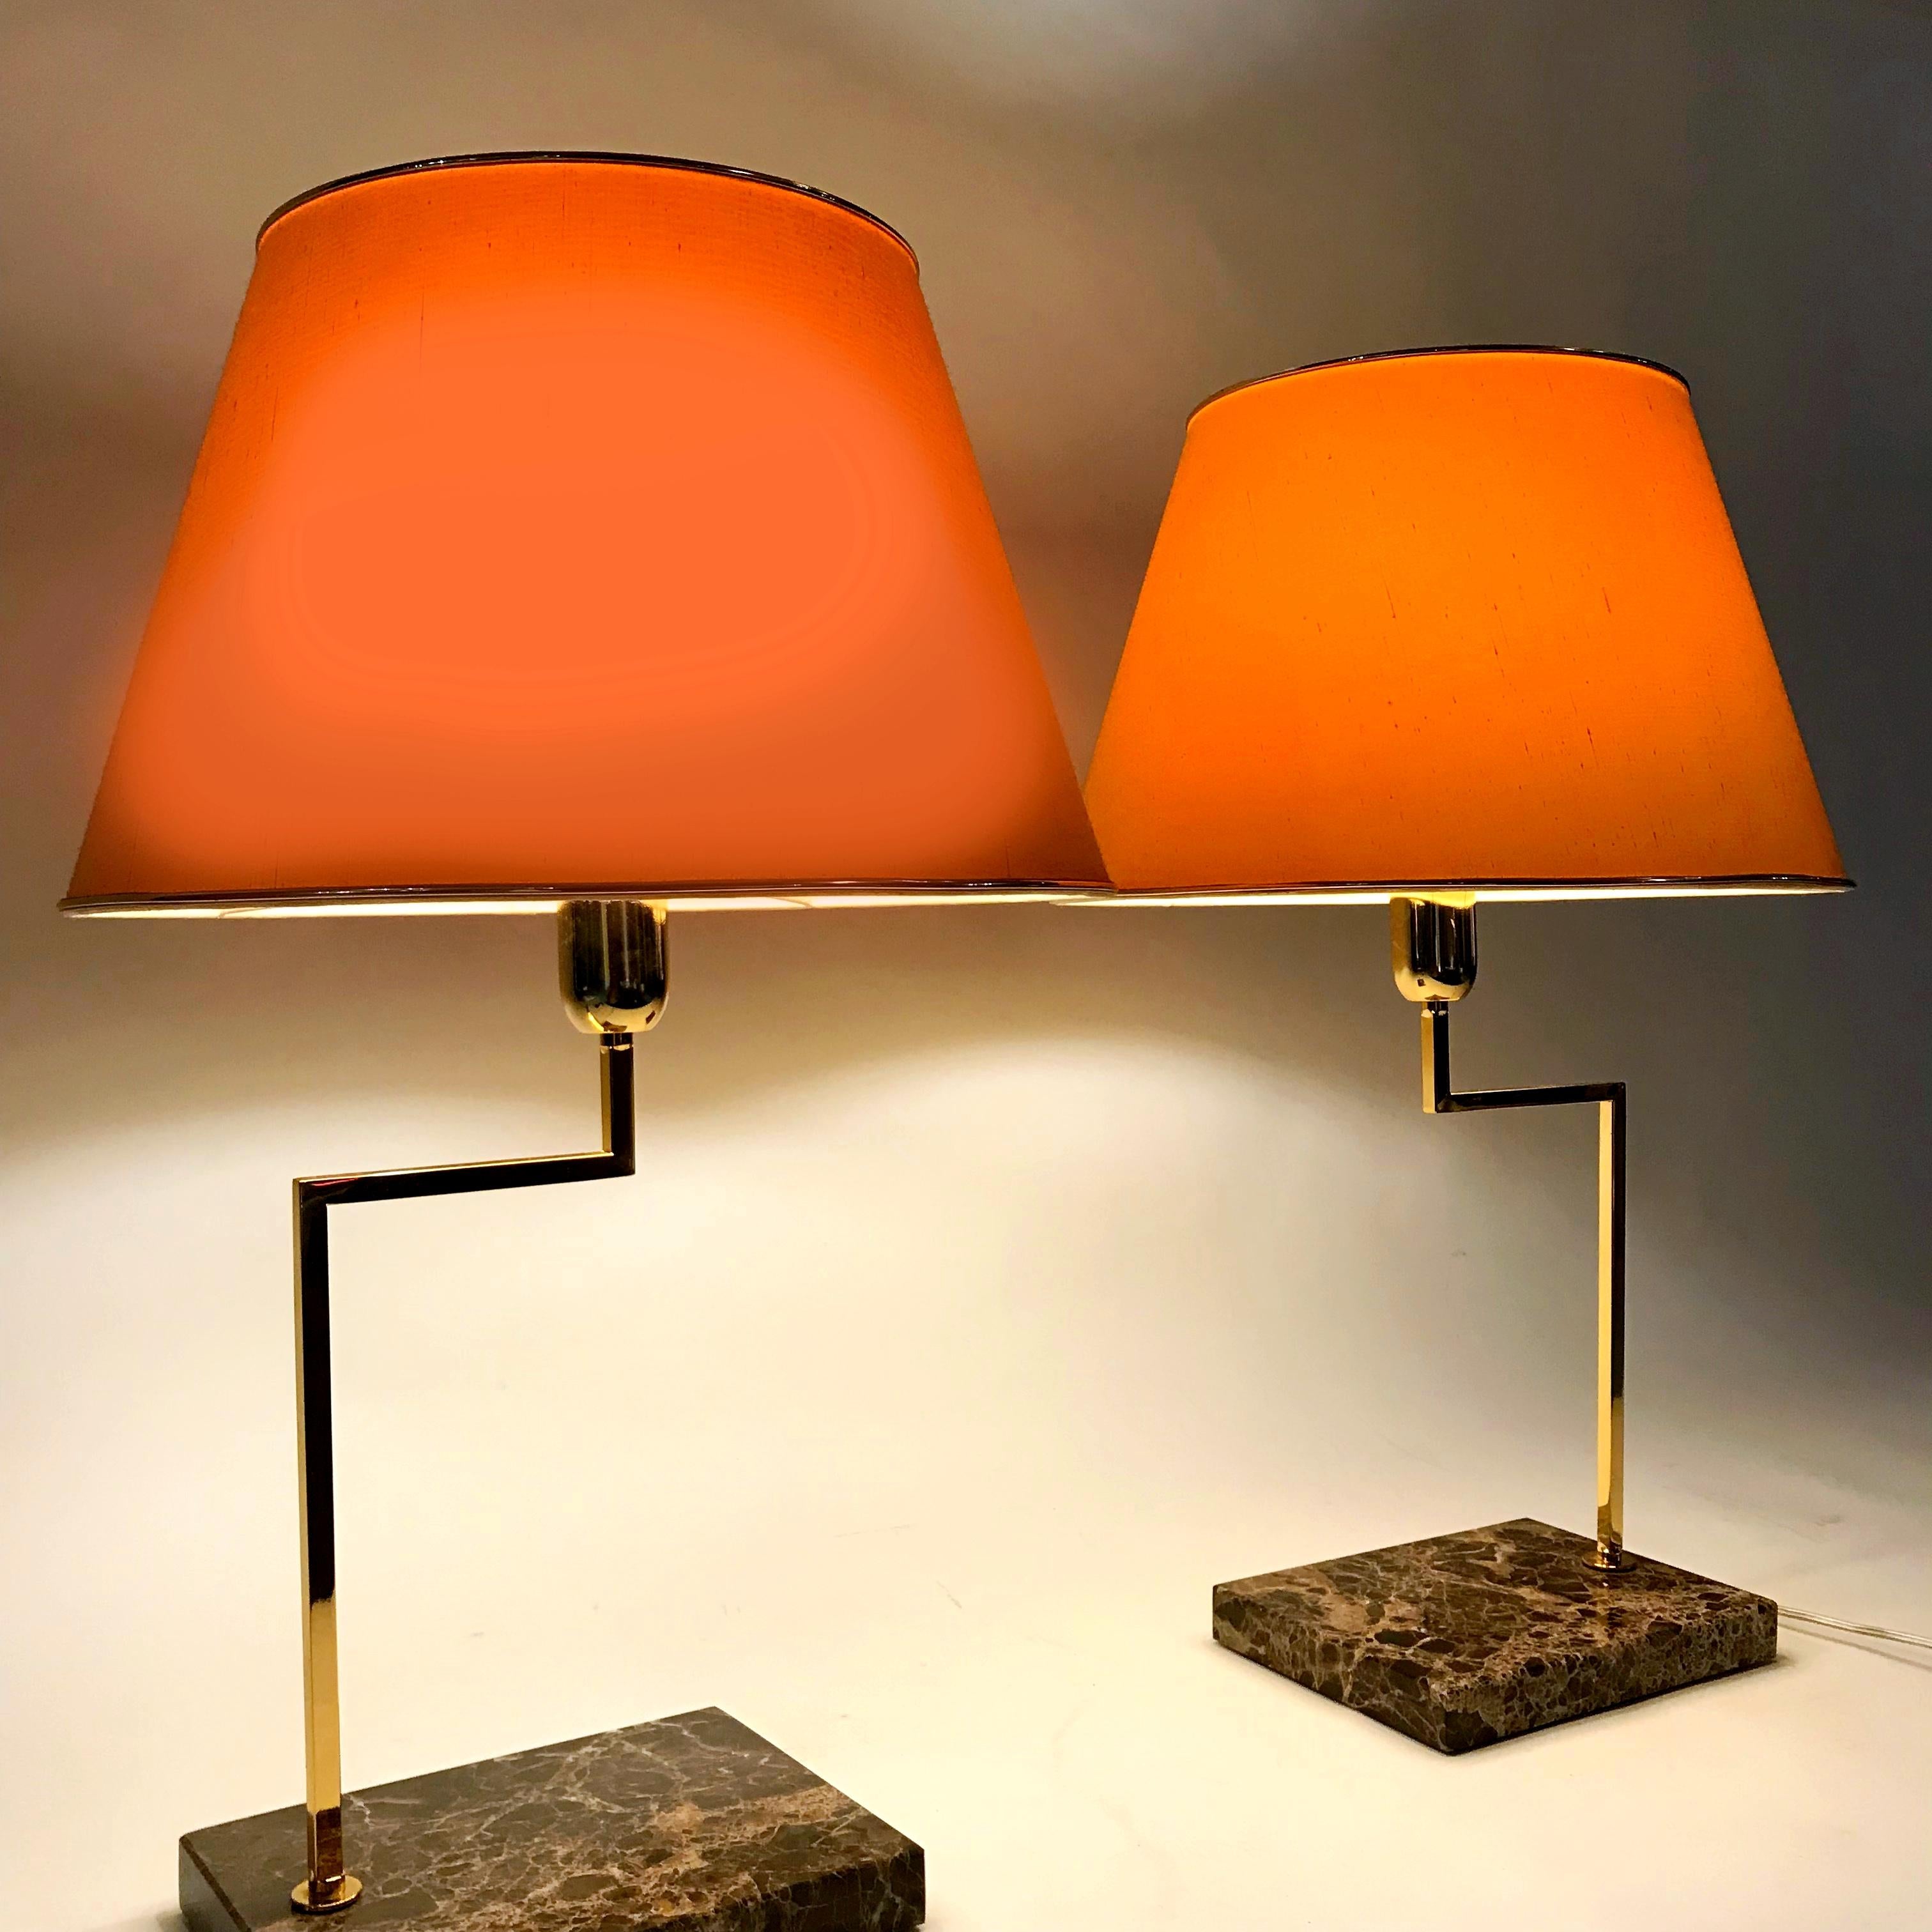 Pair of Italian midcentury large marble based table lamps with gilt brass arms.
The shades provide a large-area light. Newly rewired and tested condition.